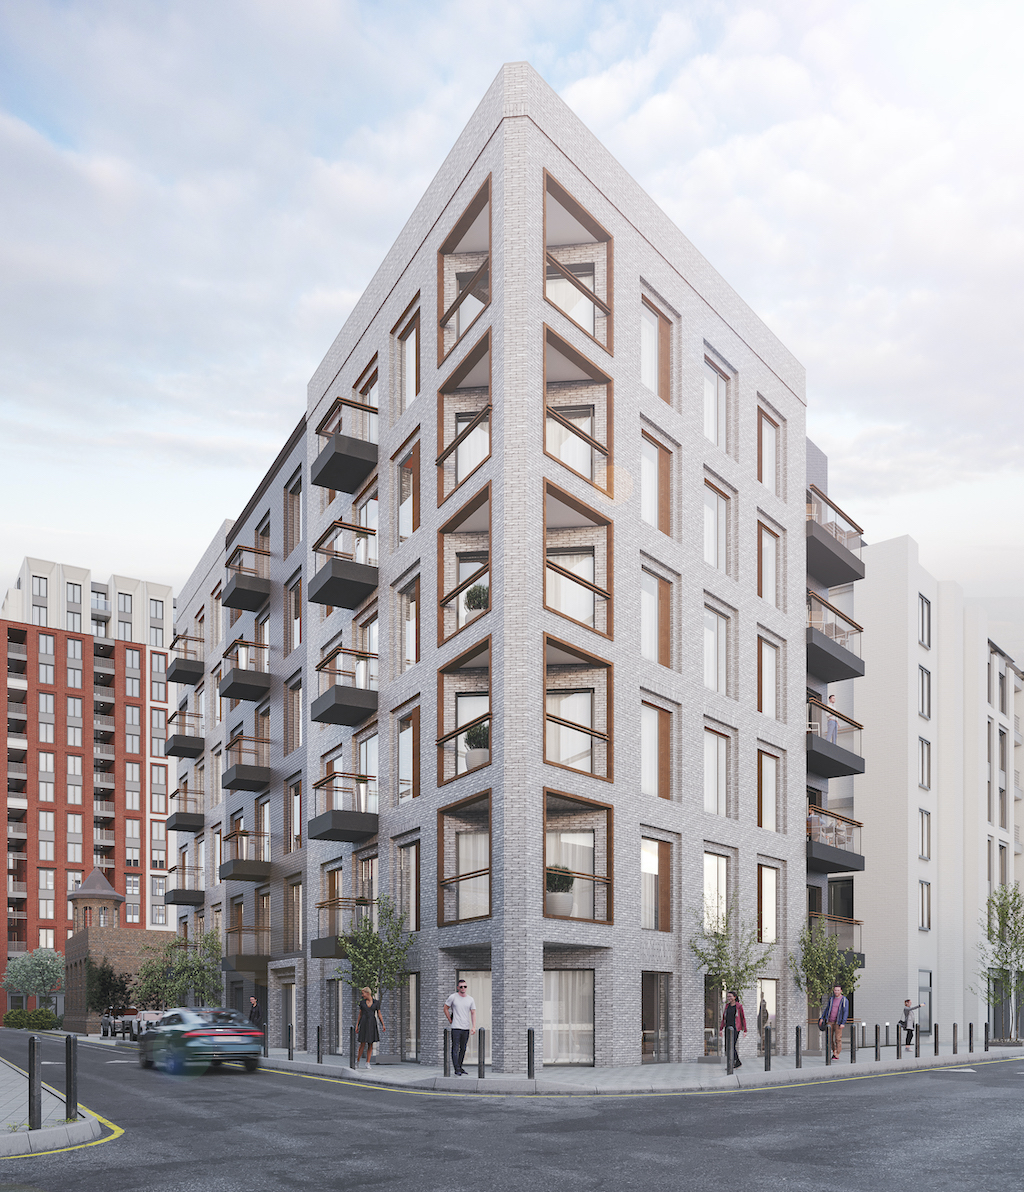 Planning permission granted for new Leicester city centre homes